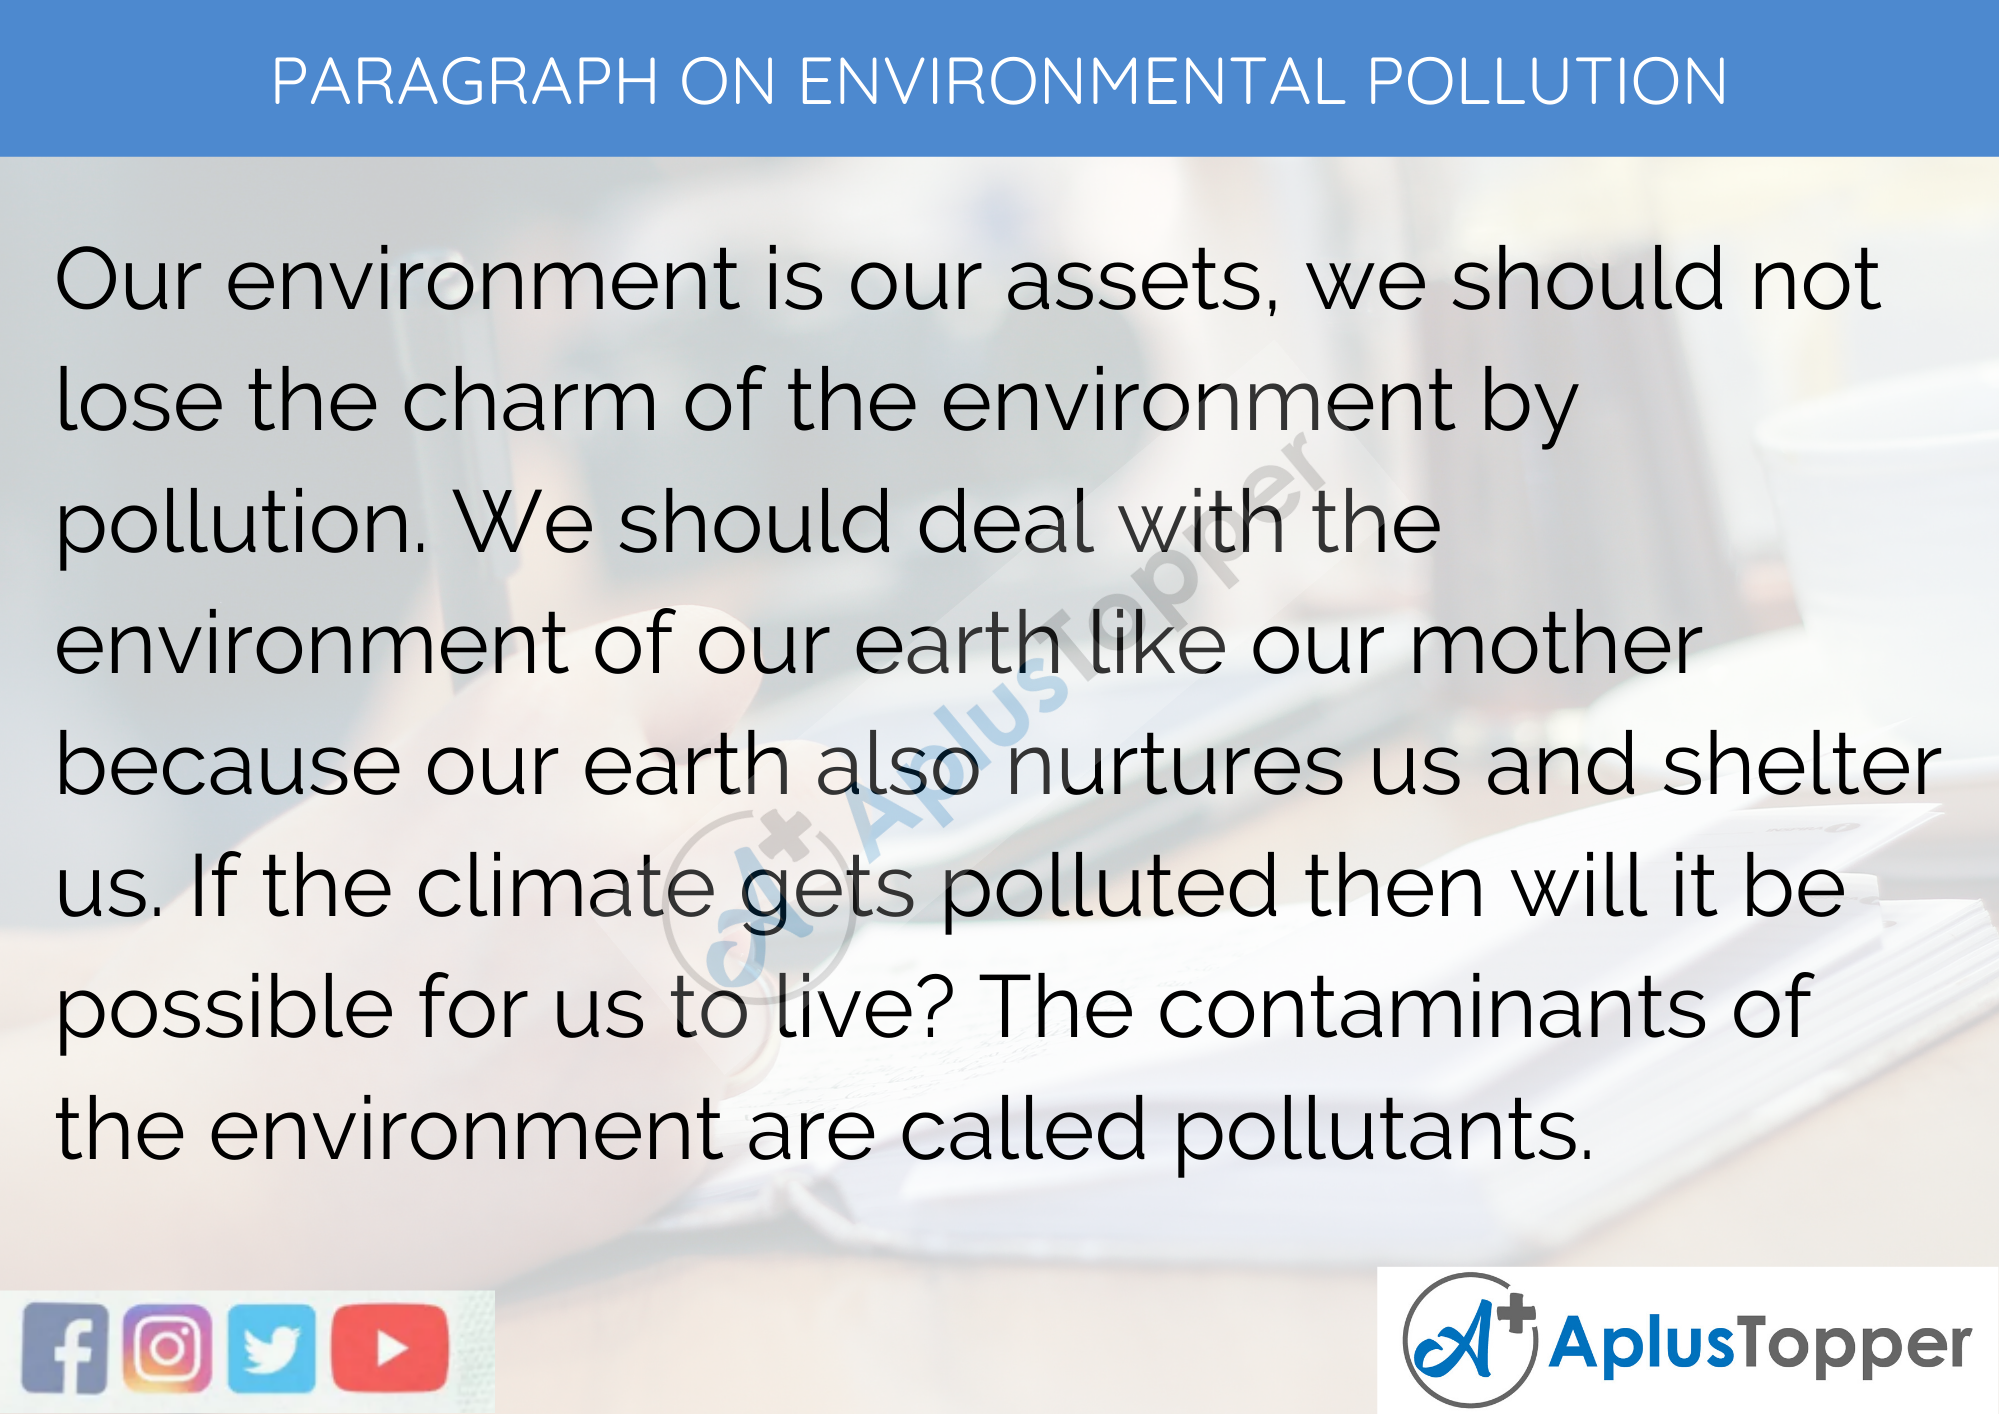 Paragraph on Environmental Pollution - 250 to 300 Words for Classes 9, 10, 11, 12, and Competitive Exams